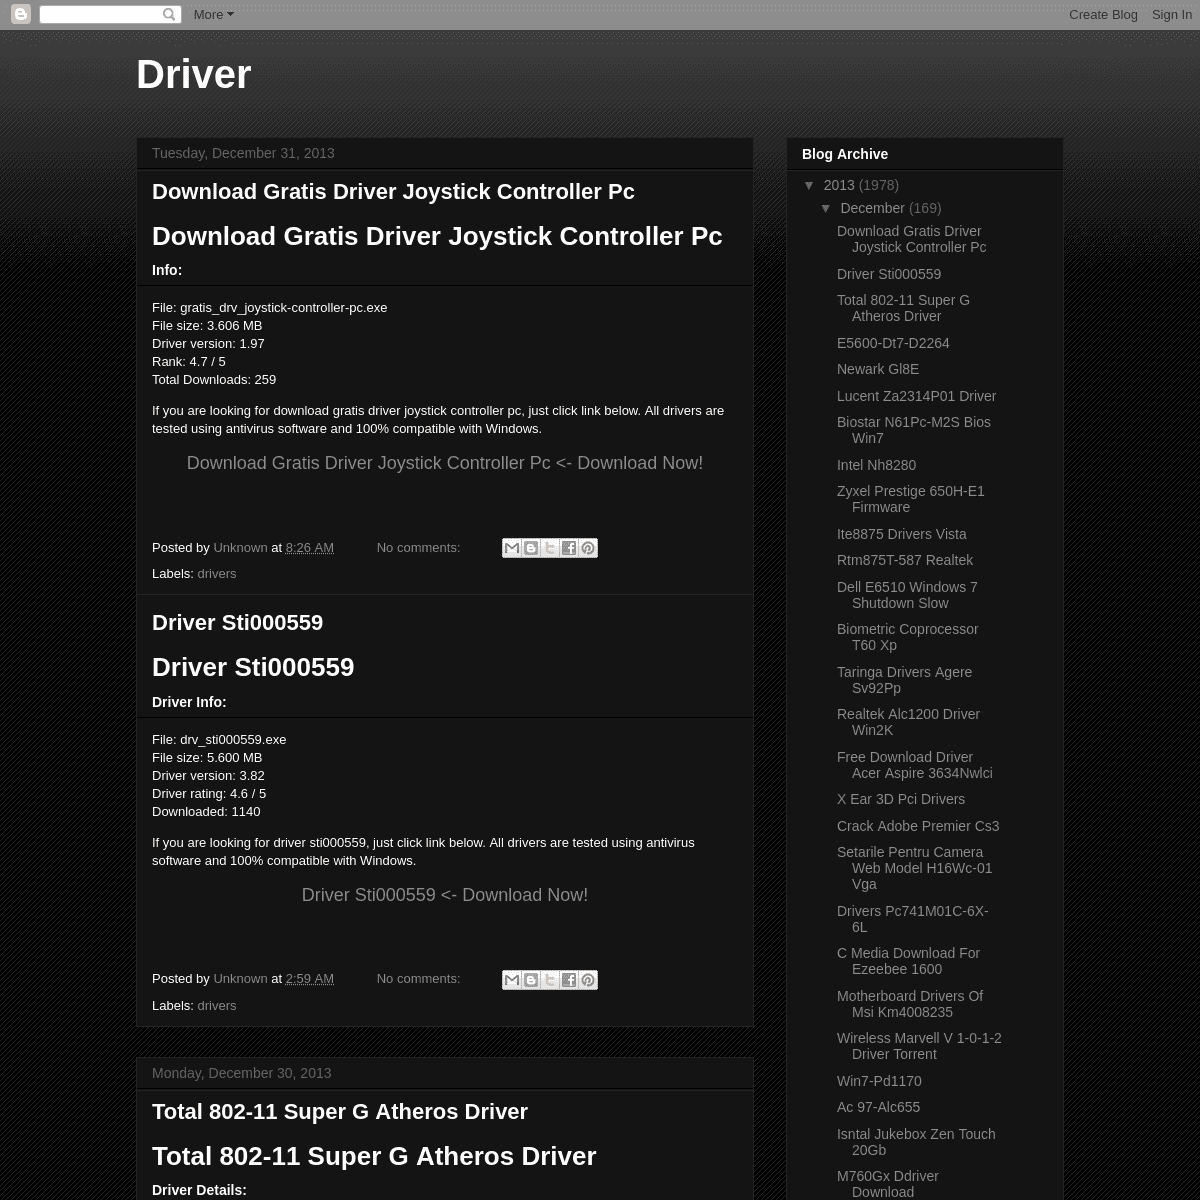 A complete backup of speed-drivers.blogspot.com